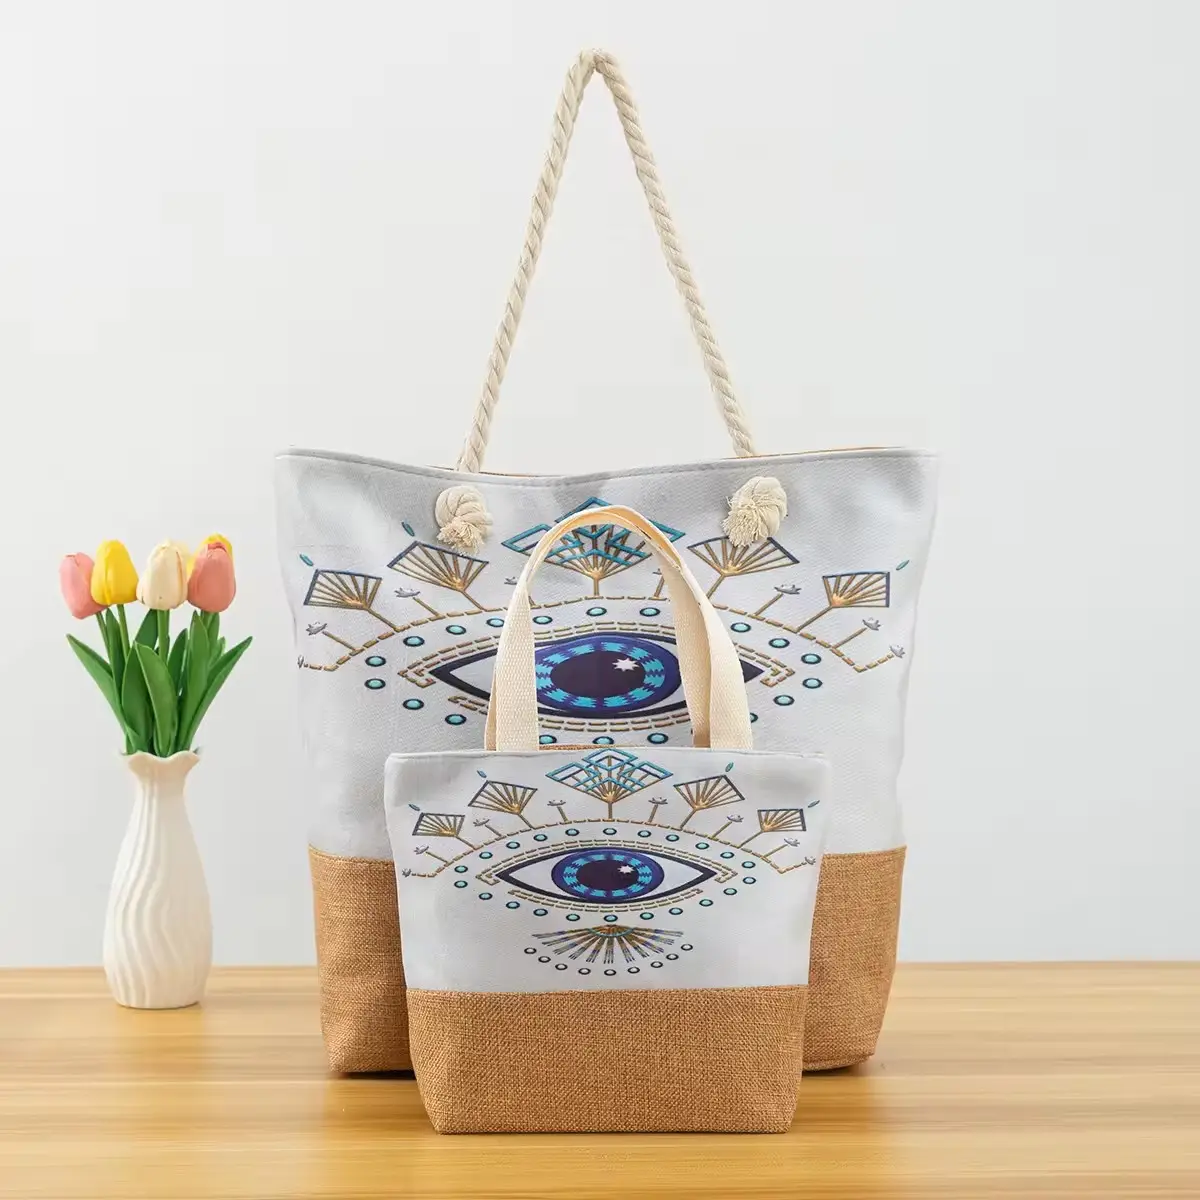 Large Capacity Ethnic Style Beach Bag with Evil Eye Graphic Perfect for Halloween Festivals and Vacation Getaways Set